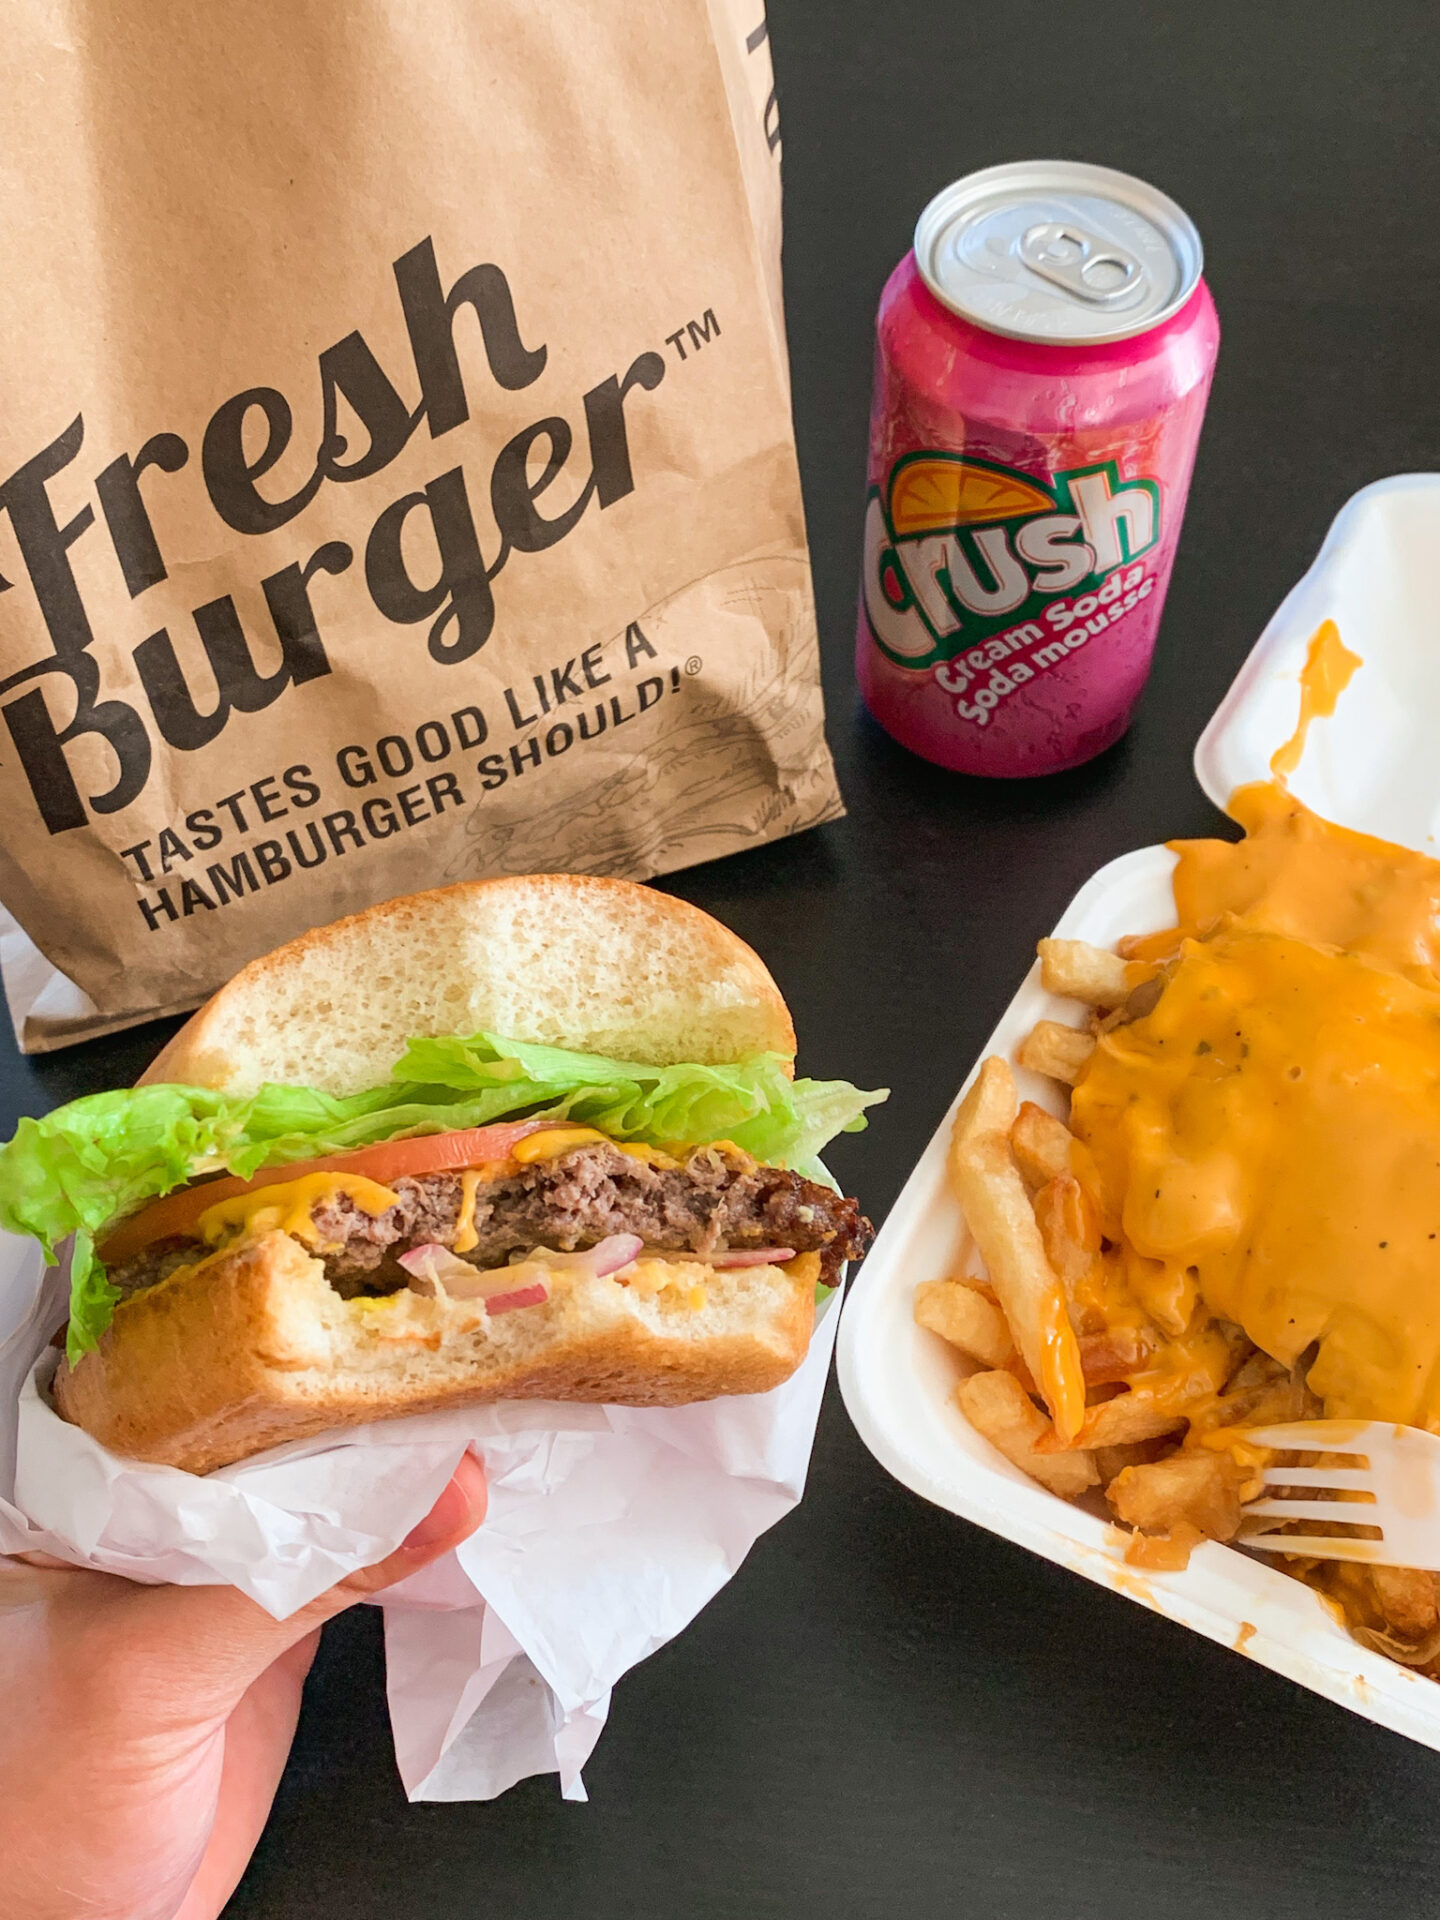 Burger and Cali-style fries from Fresh Burger Restaurant in Richmond Hill, Ontario